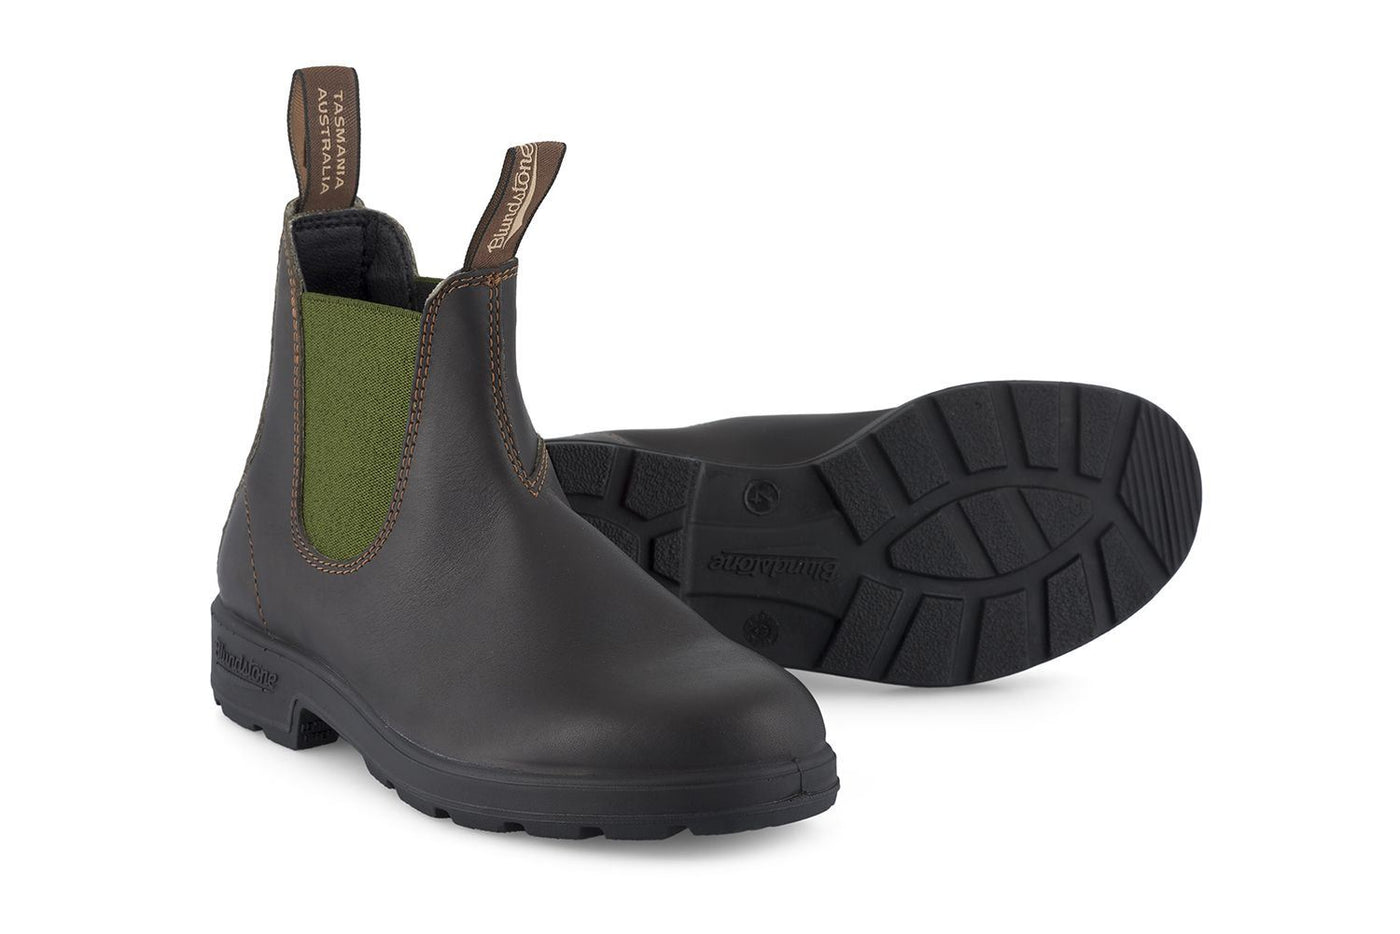 Blundstone #519 Stout Brown/Olive Chelsea Boot